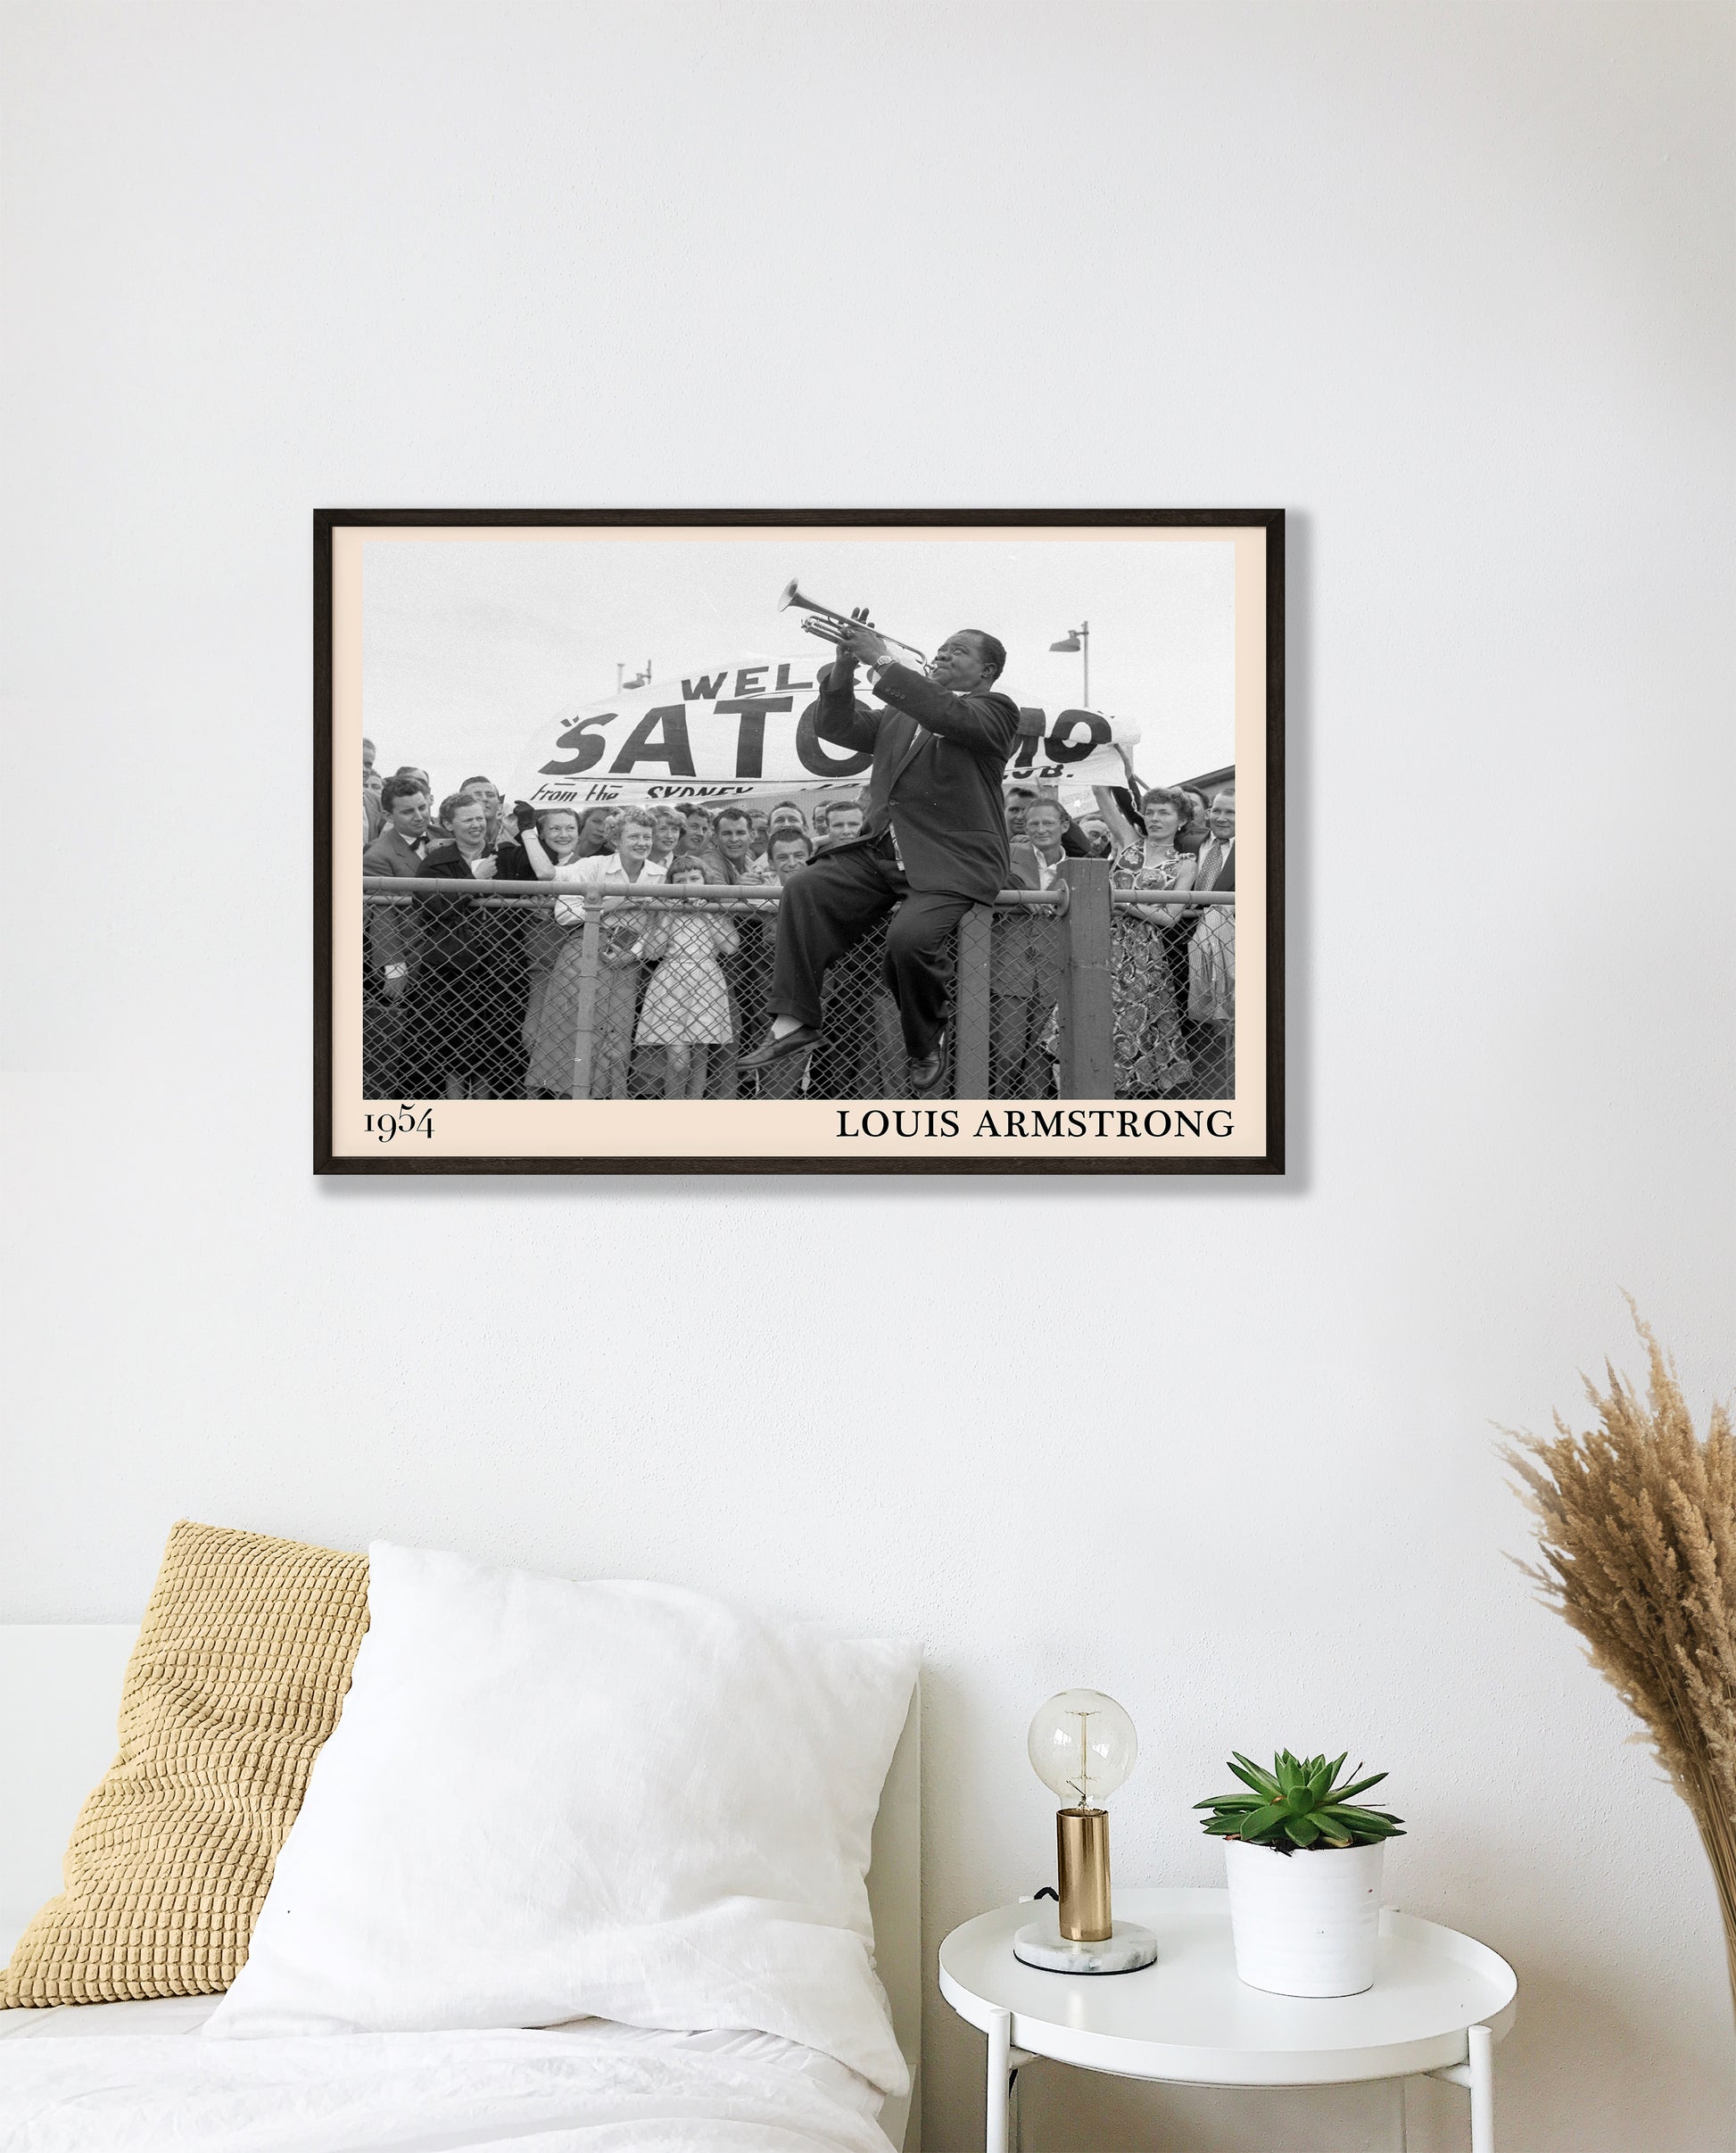 1954 picture of Louis Armstrong playing his trumpet sat on a fence. Picture crafted into a cool black framed music poster, with an off-white border. Poster is hanging on a white bedroom wall